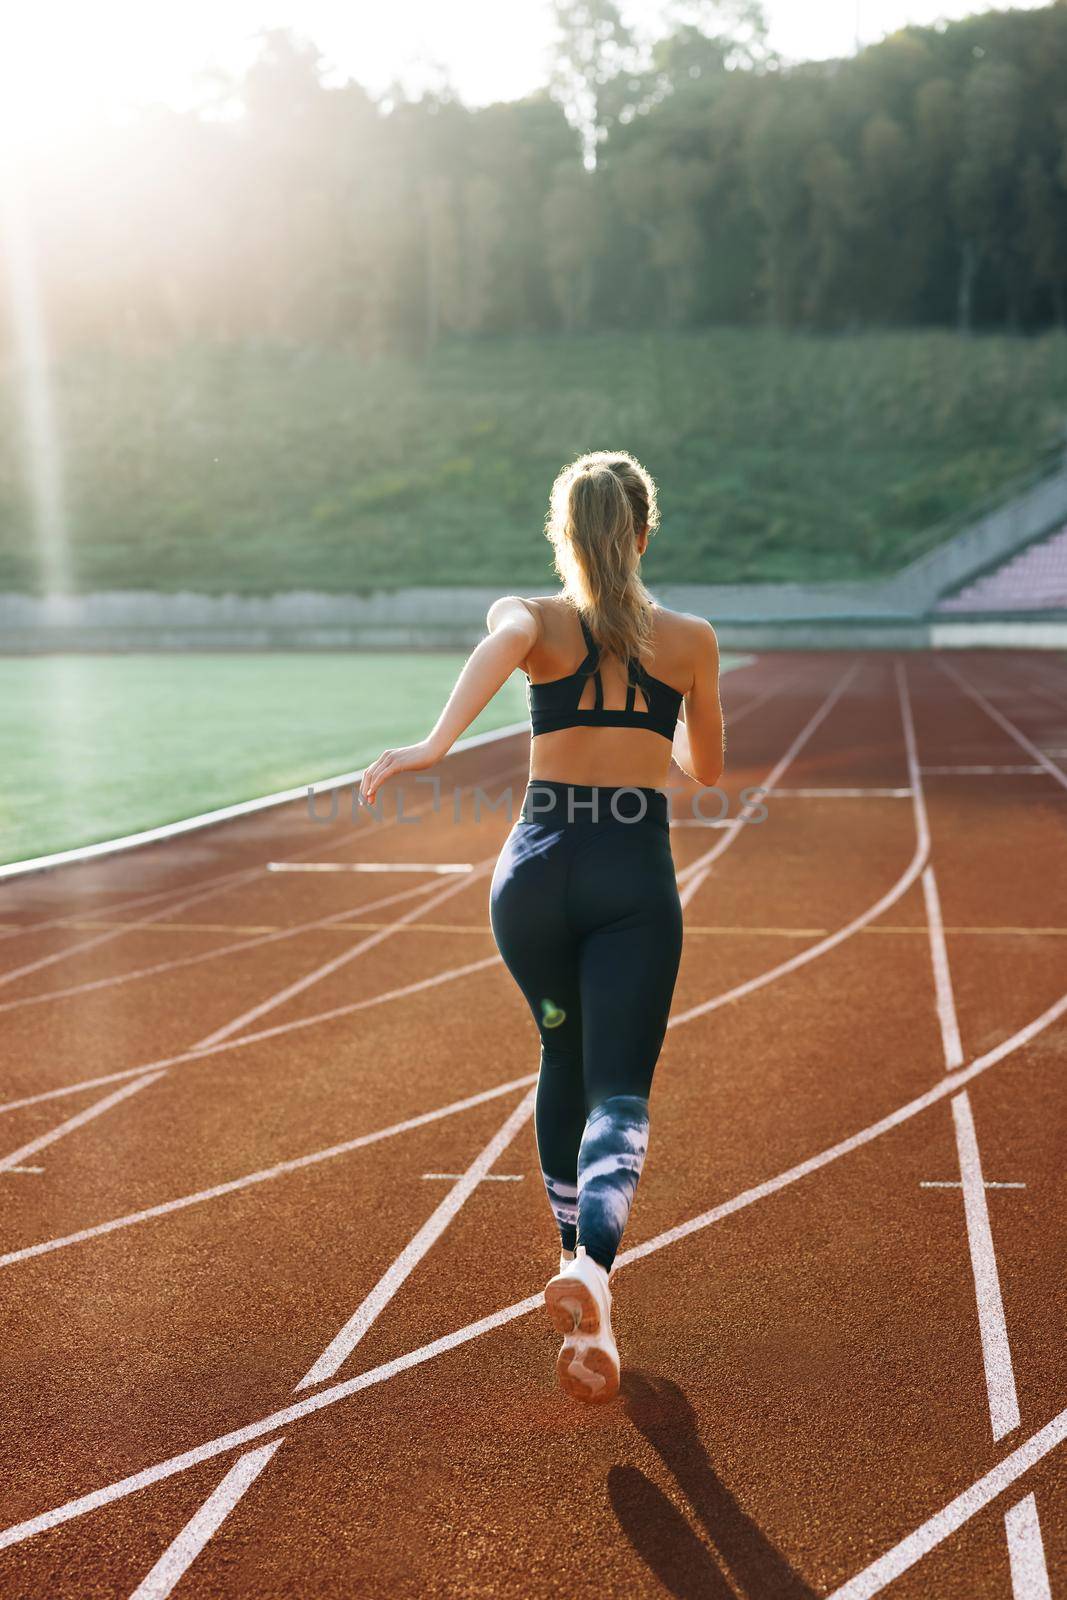 Rear view of Athlete Woman Running Fast at Track in the Morning Light , Training Hard, Getting Ready for Race Competition or Marathon. Fit Girl in Black Sportswear Jogging on a Running Track.